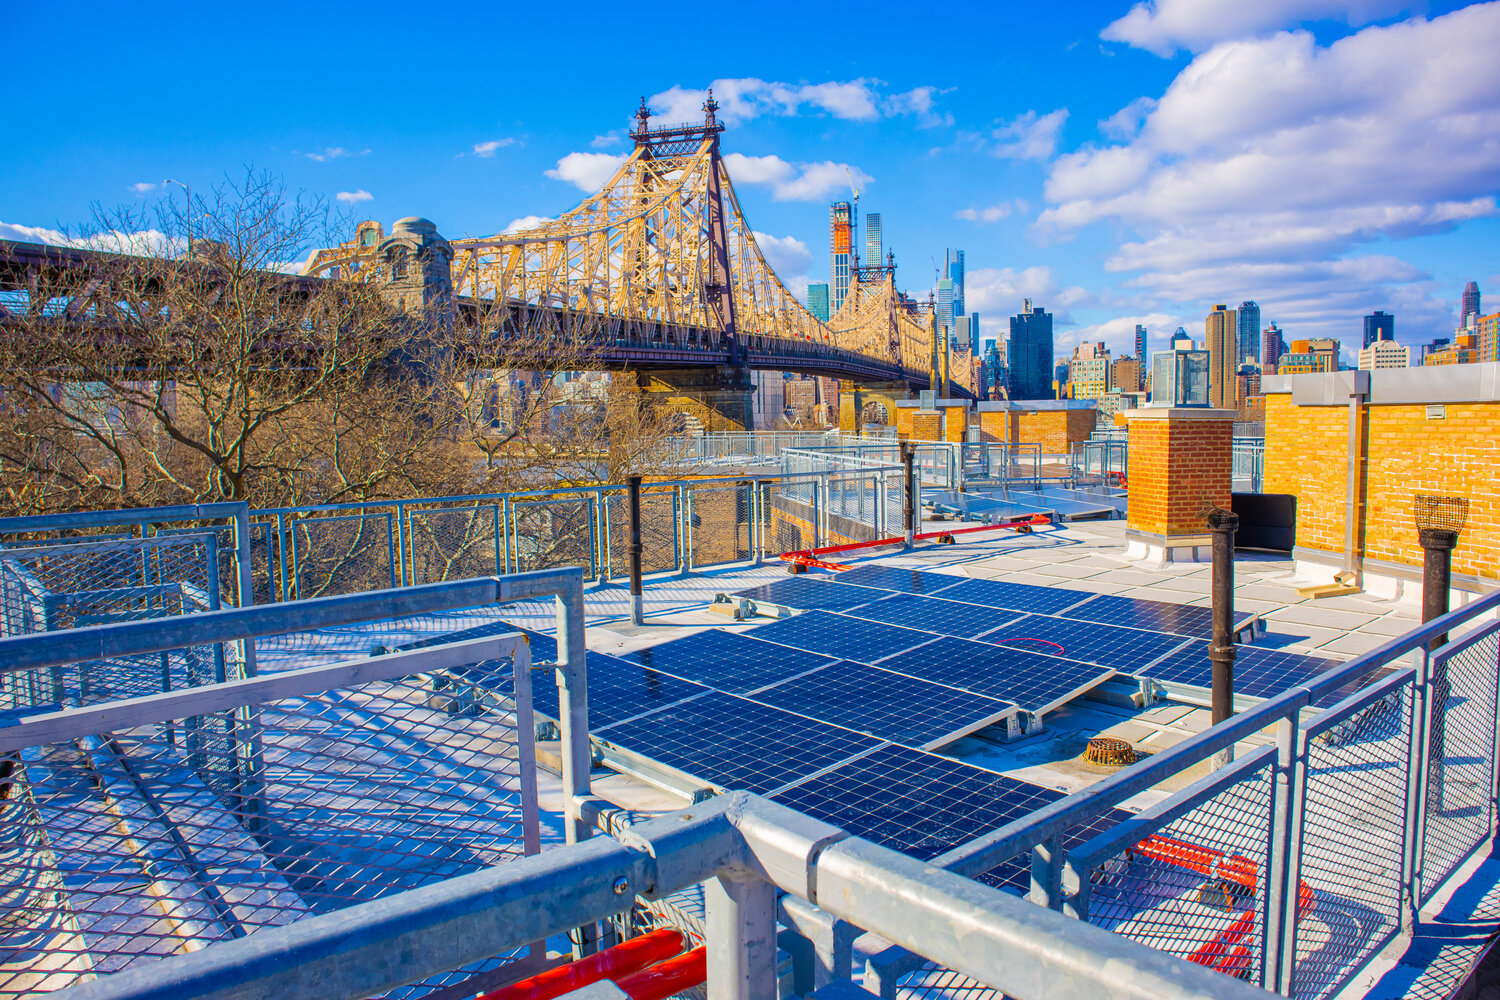 Rooftop solar arrays on a Queensbridge Houses New York City Housing Authority building. A coalition of dozens of labor, community, environmental and business organizations is pushing for the state to allocate $1 billion budget for climate projects built mainly by union labor.